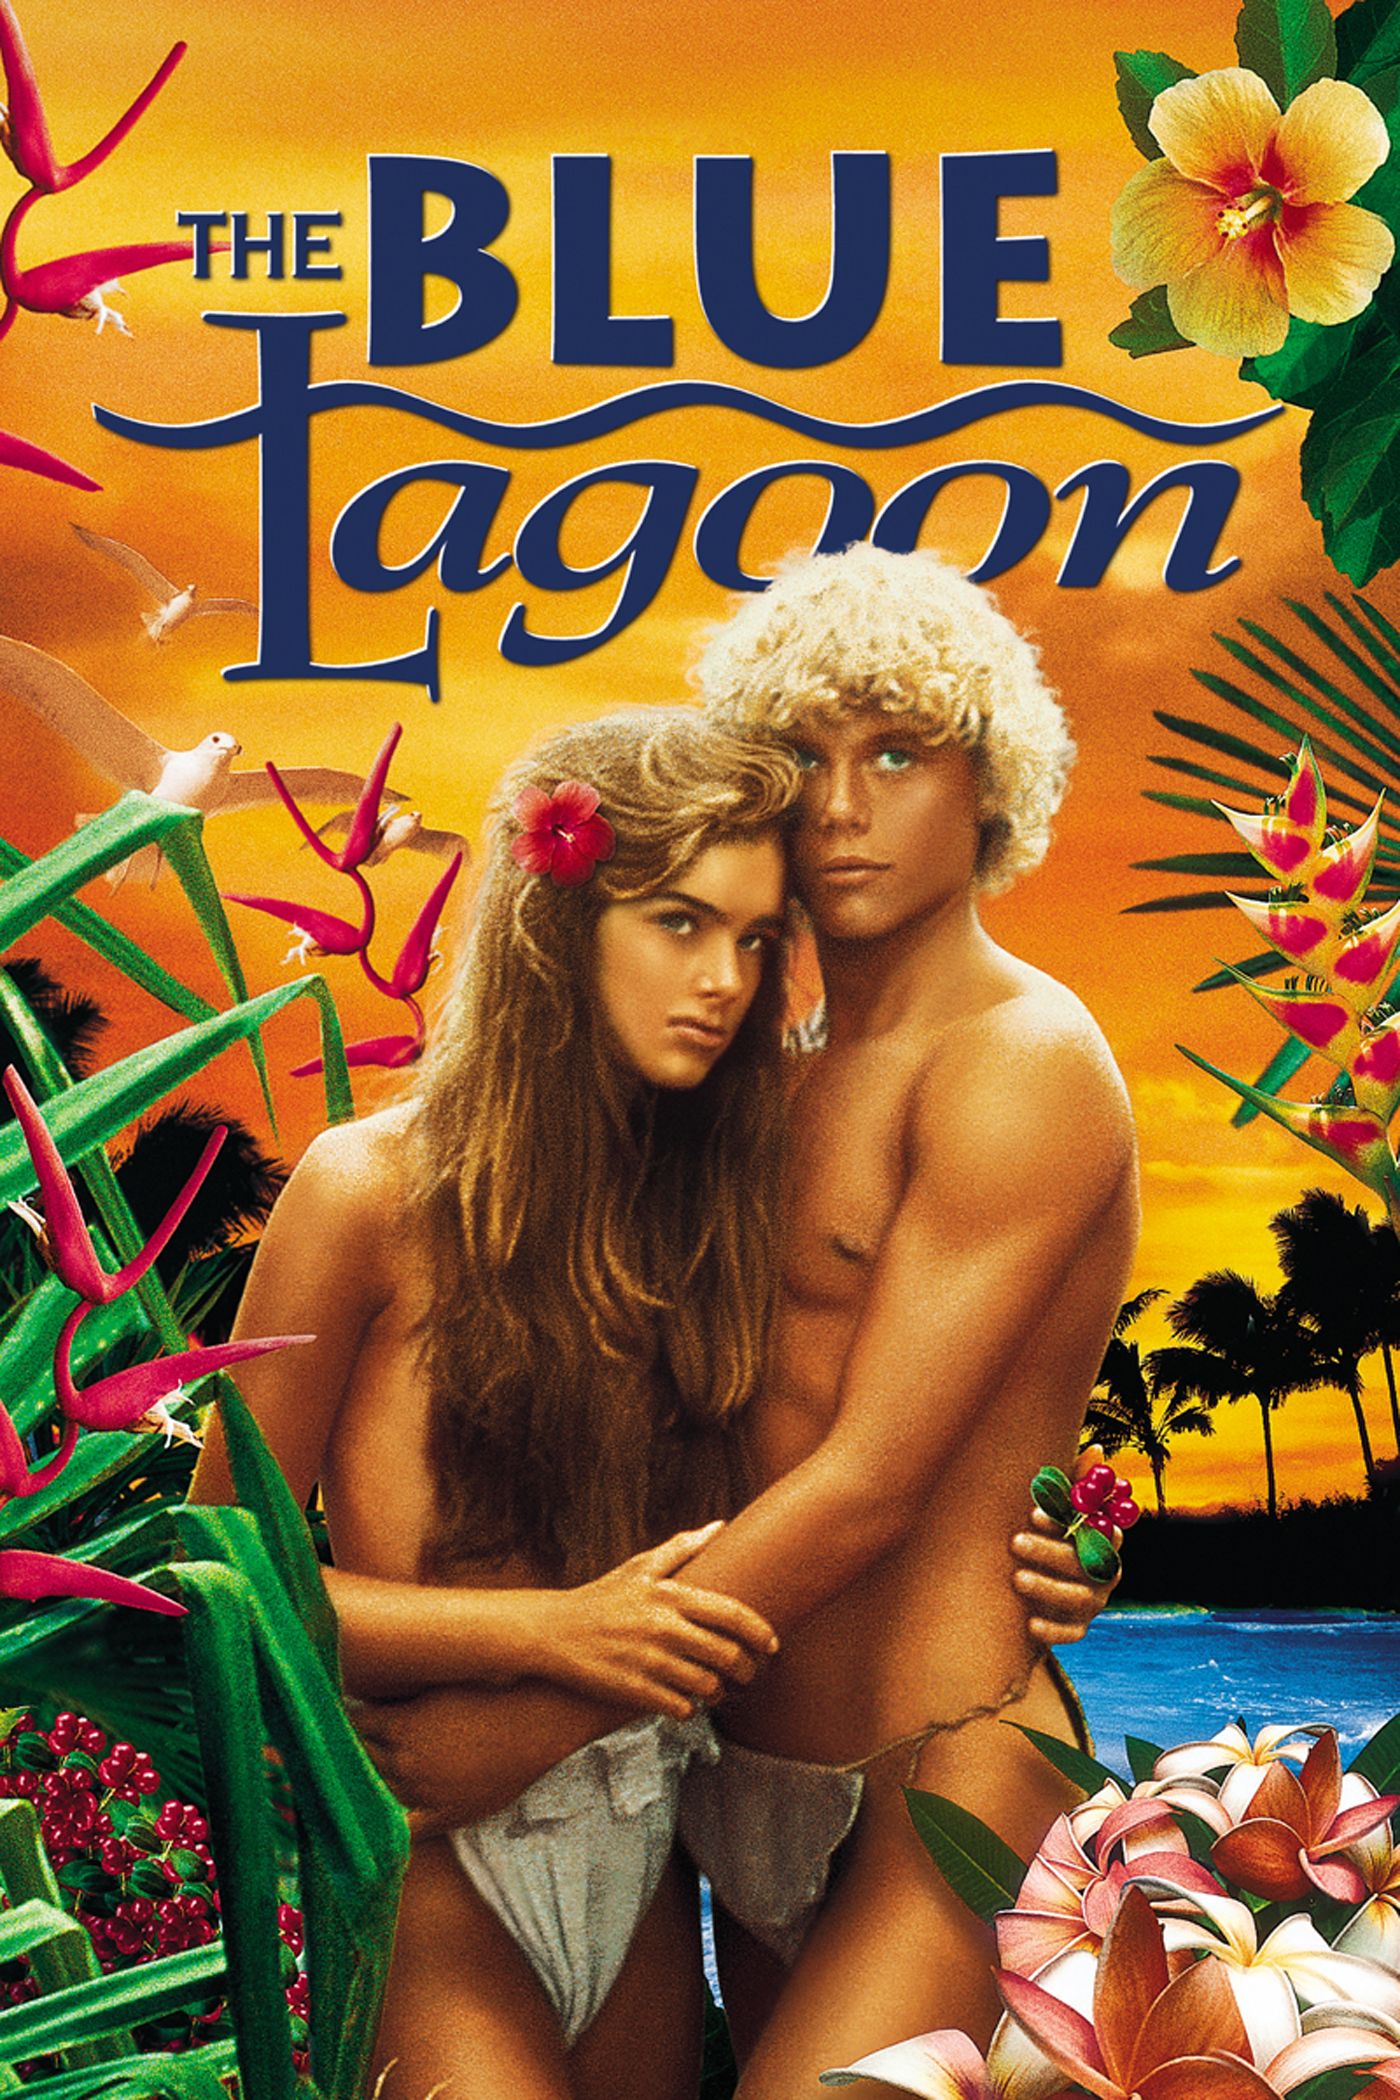 bill mandich recommends The Blue Lagoon Full Movie Download